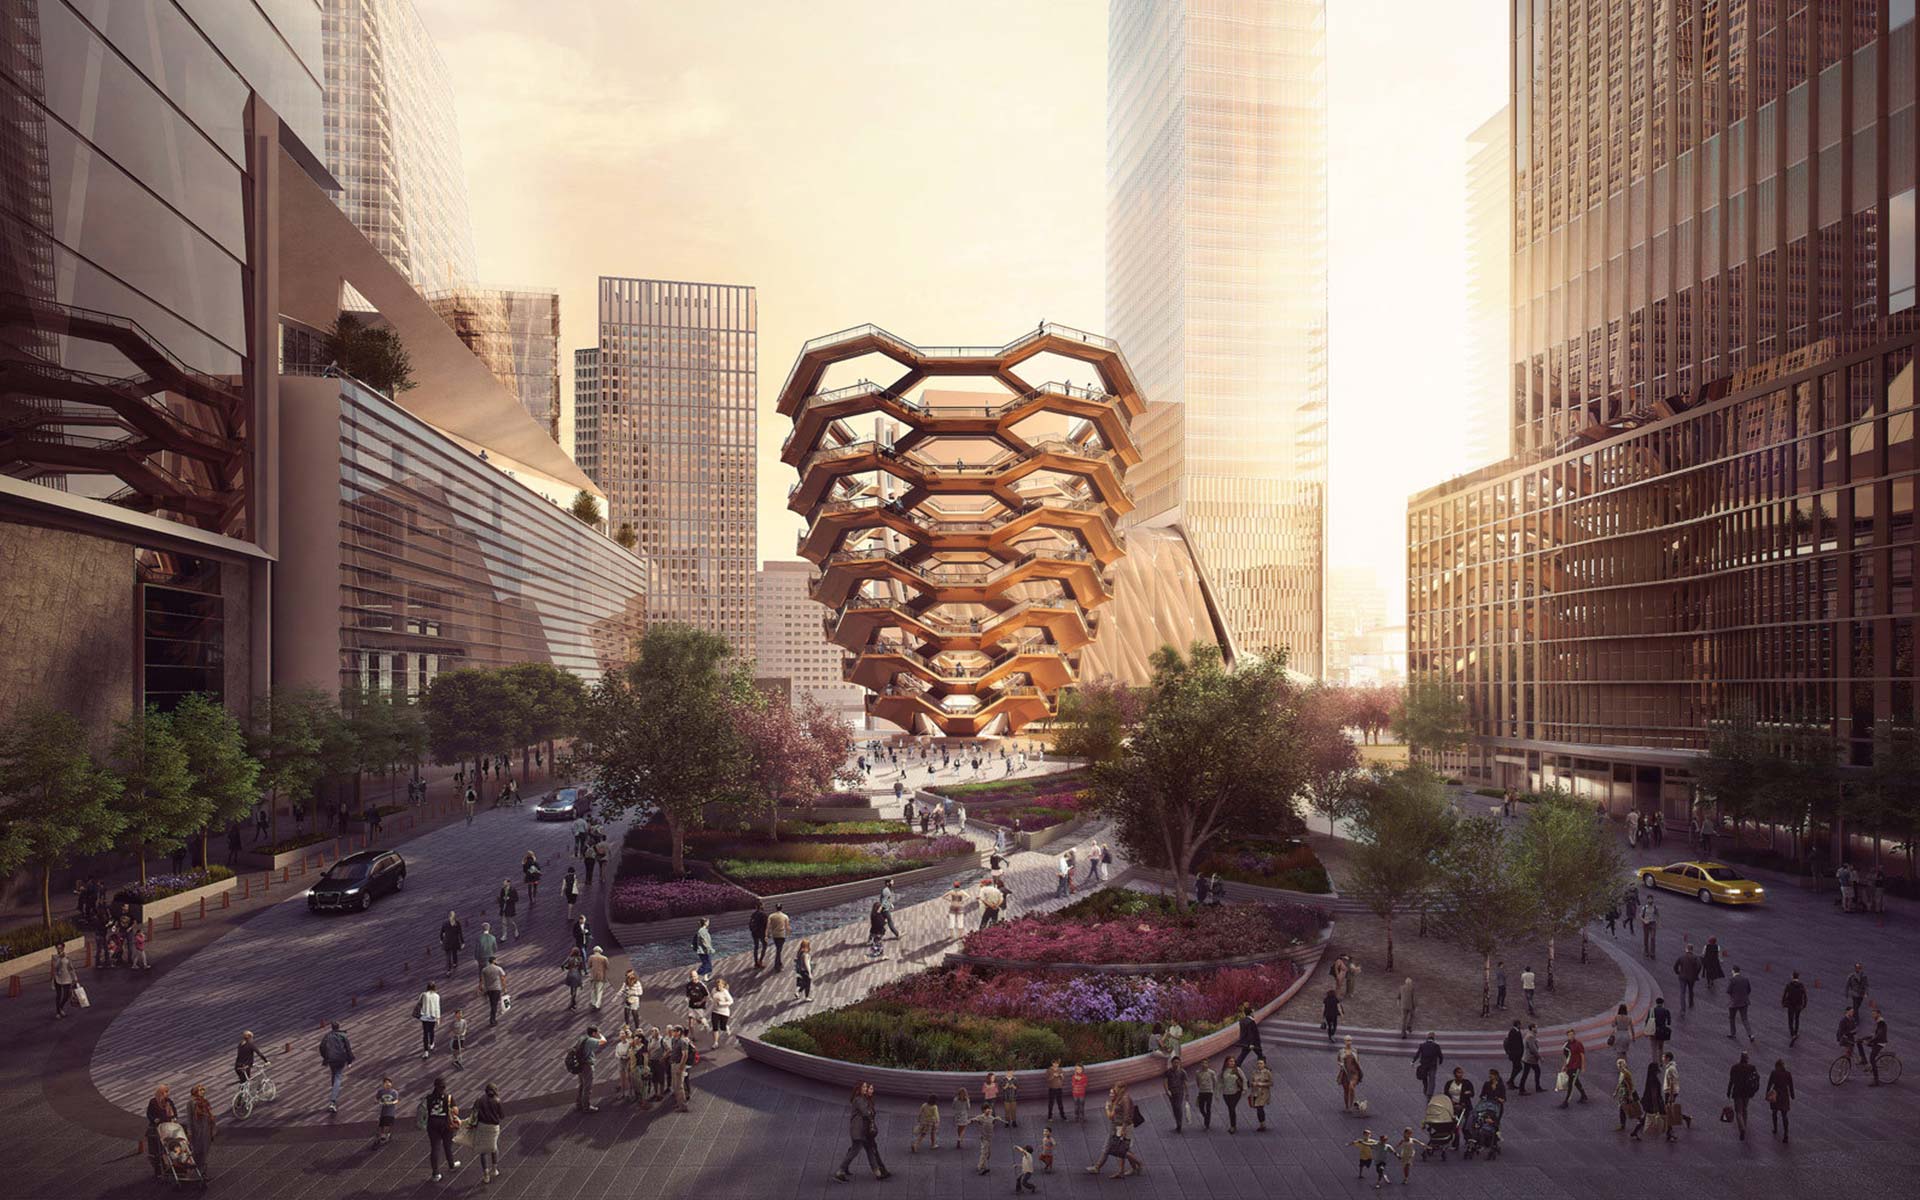 FT-CROP-View-of-the-Public-Square-and-Gardens-Looking-South-from-33rd-St.-courtesy-of-Forbes-Massie-Heatherwick-Studio.jpg